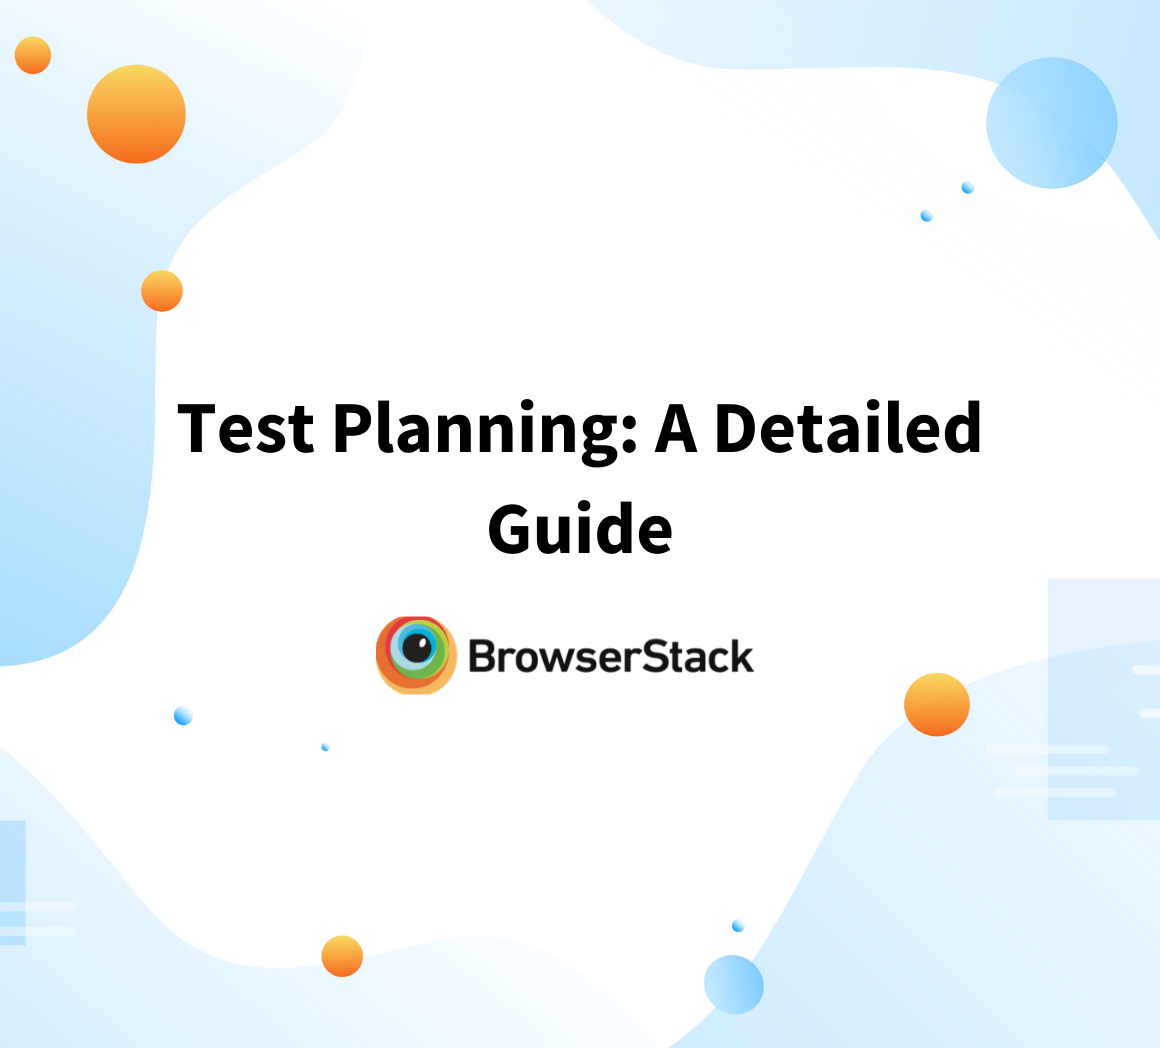 A Detailed Guide on Test Planning